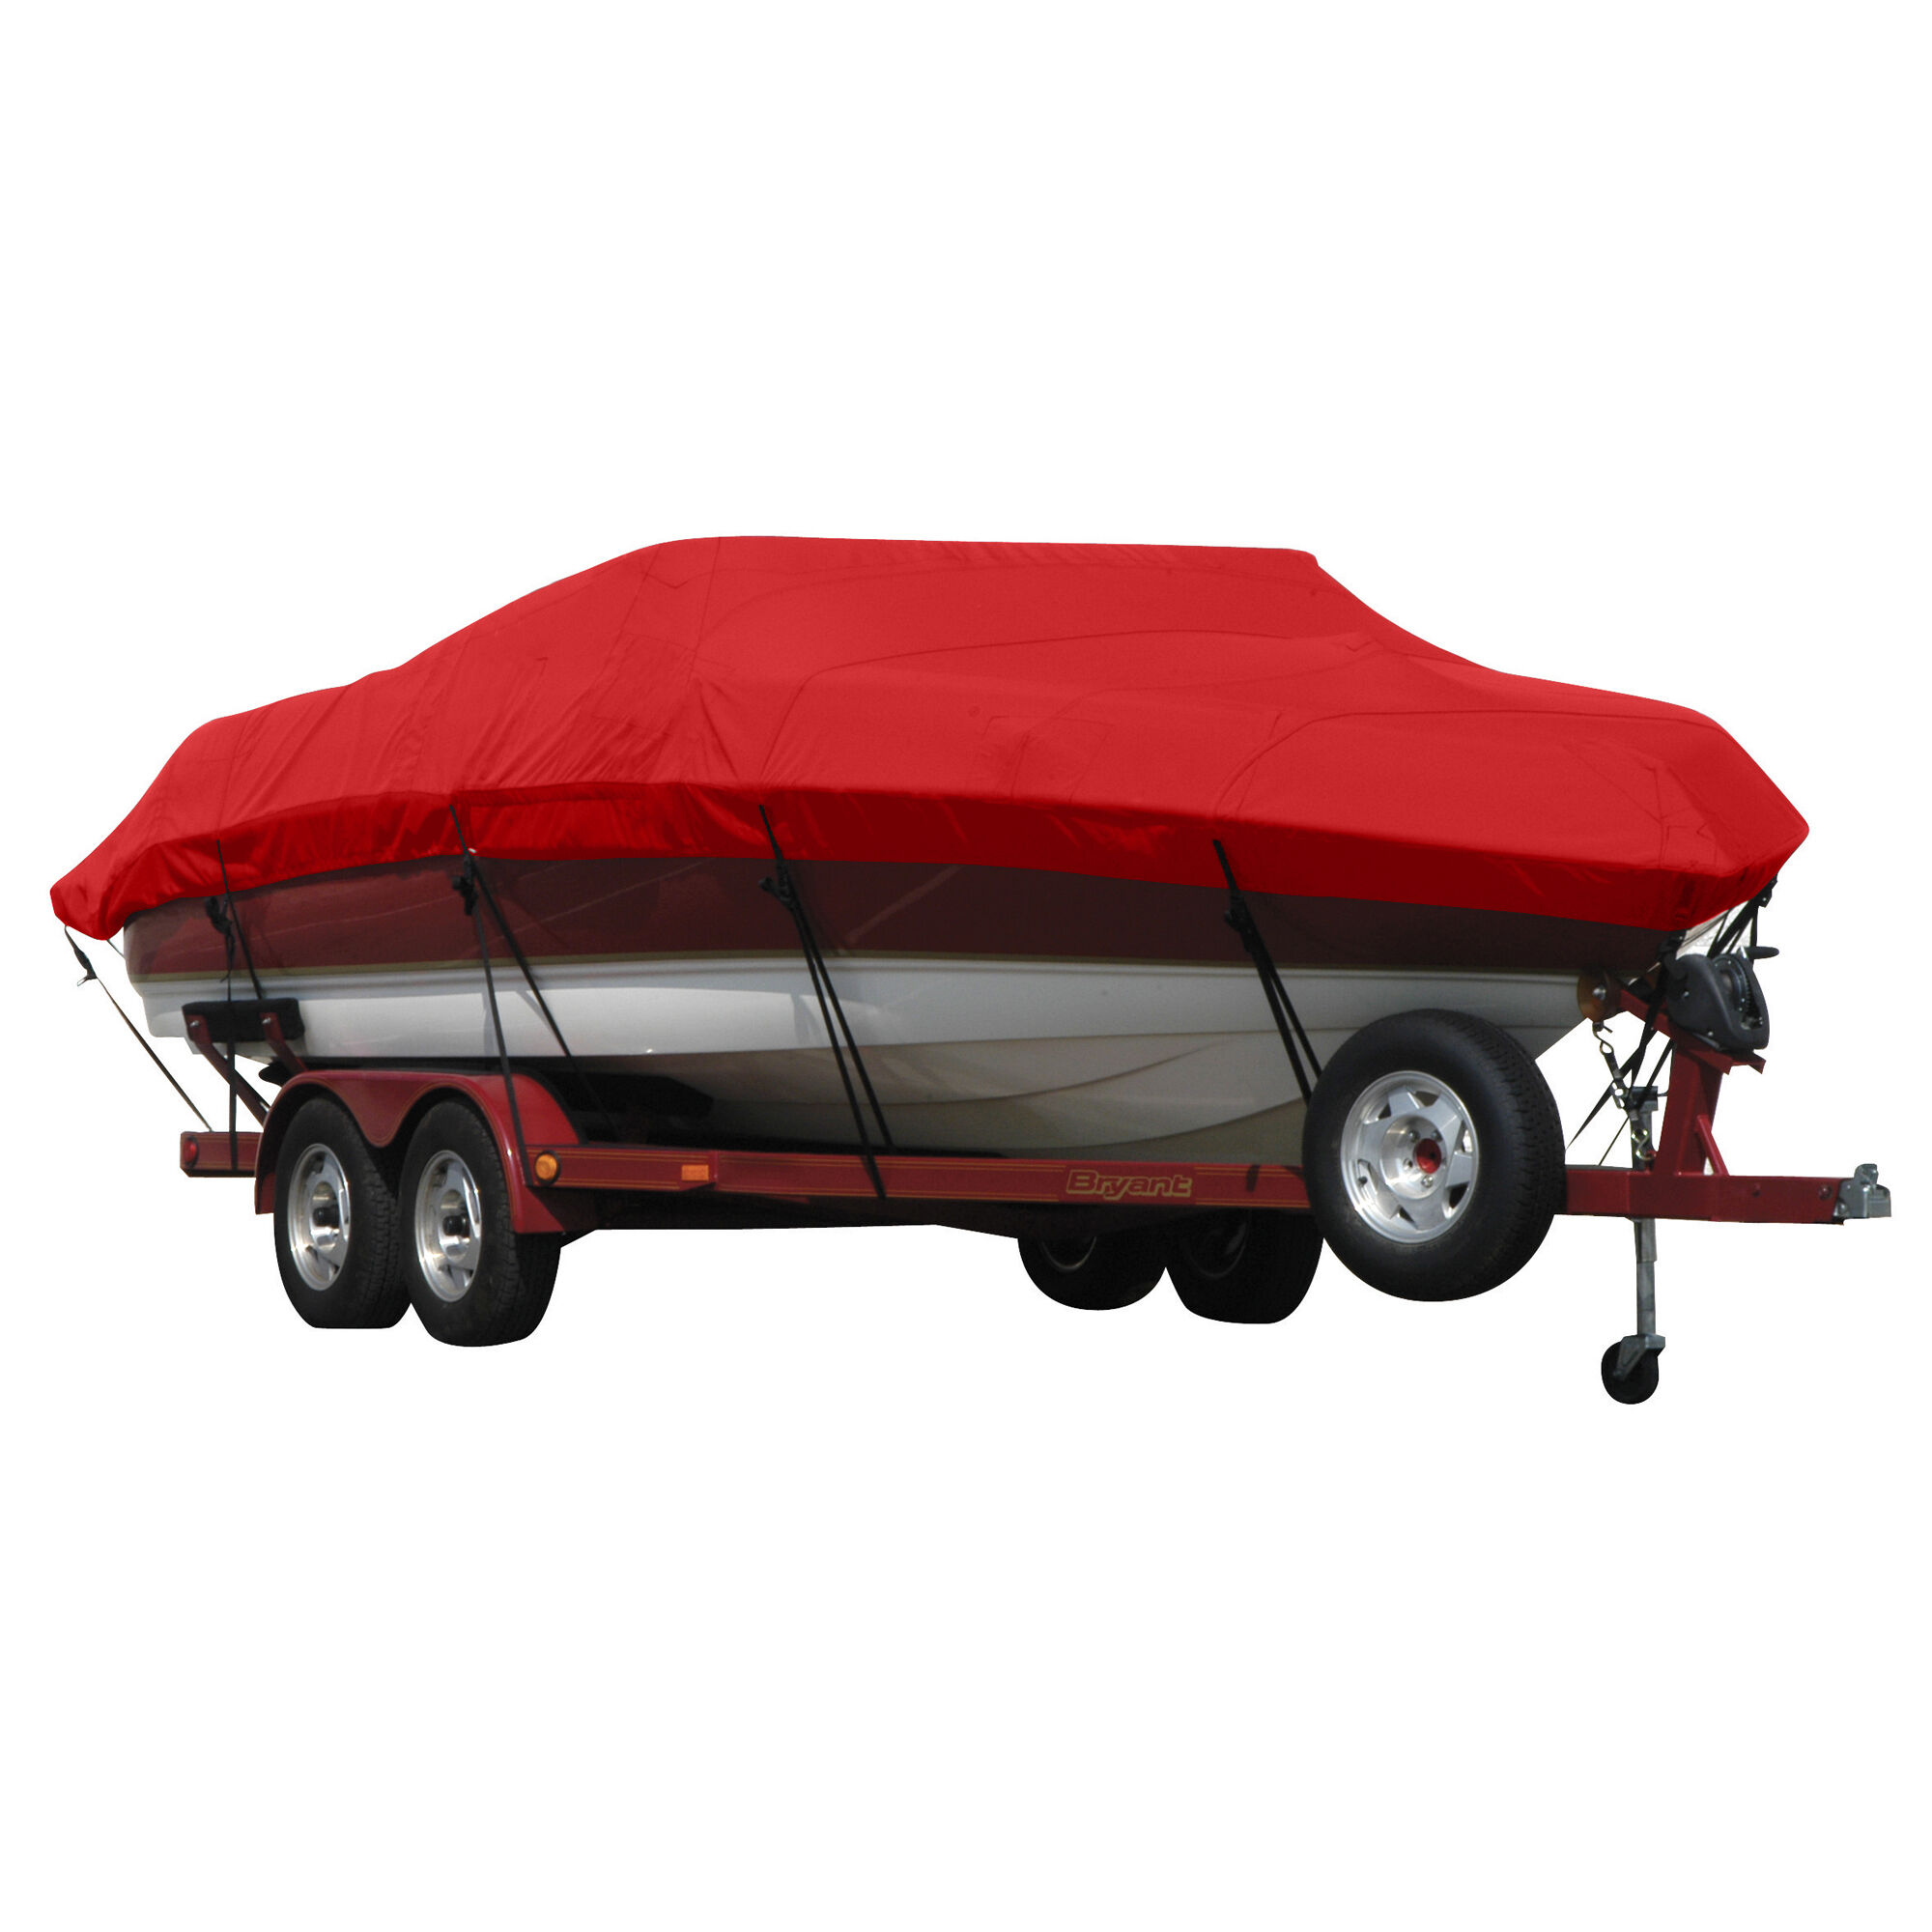 Covermate Exact Fit Sunbrella Boat Cover for Campion Chase 580 Zri/Zricd Chase 580 Zri/Zricd I/O. Jockey Red